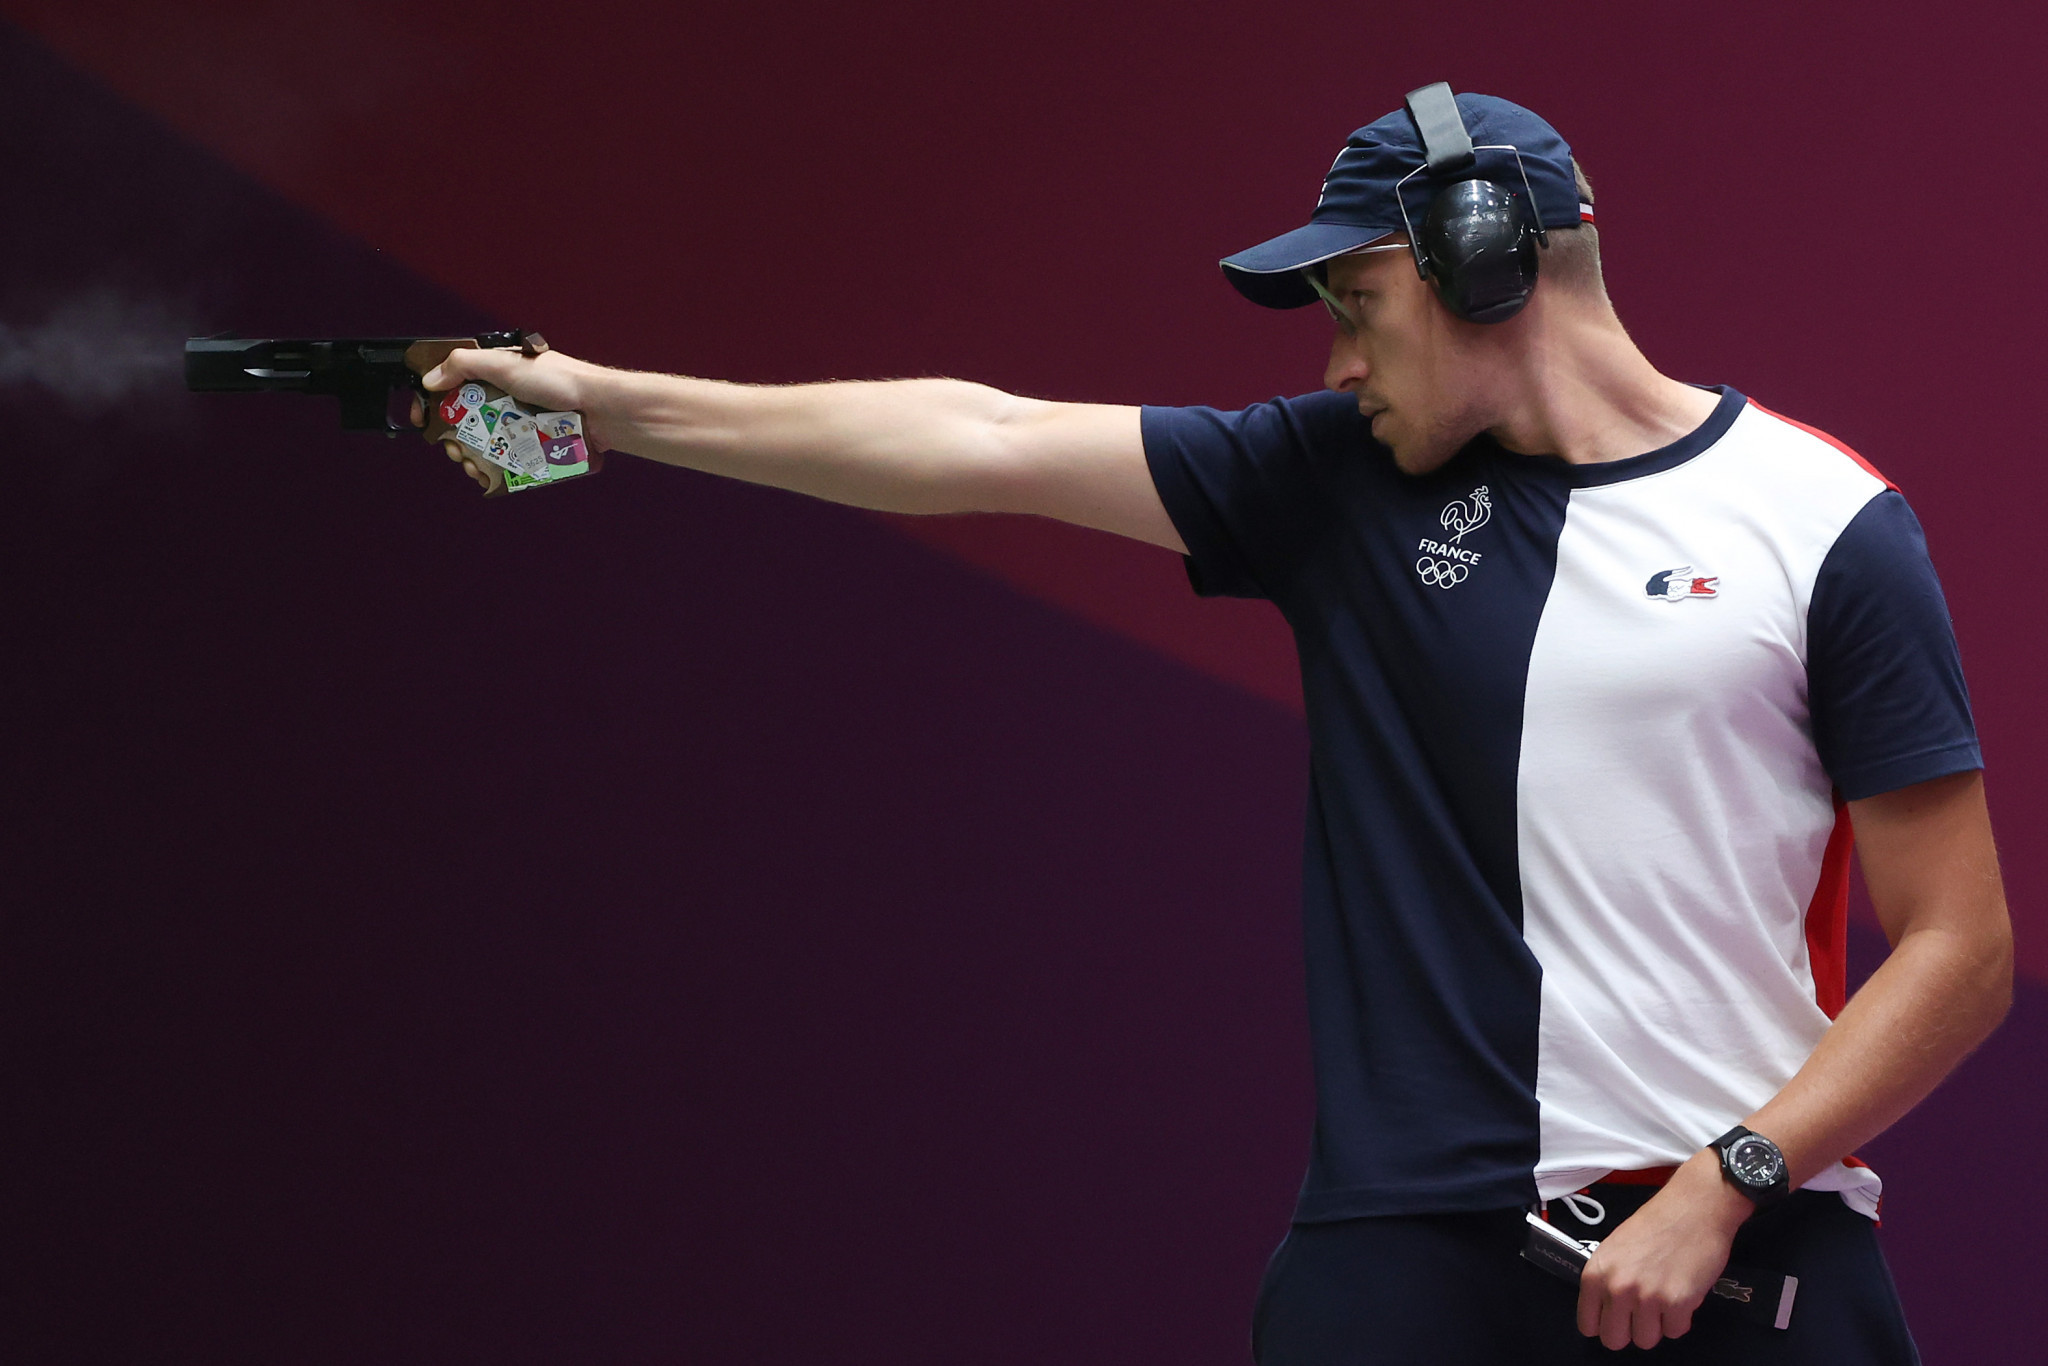 Olympic champions Quiquampoix and Hancock triumph at ISSF World Cup in Baku